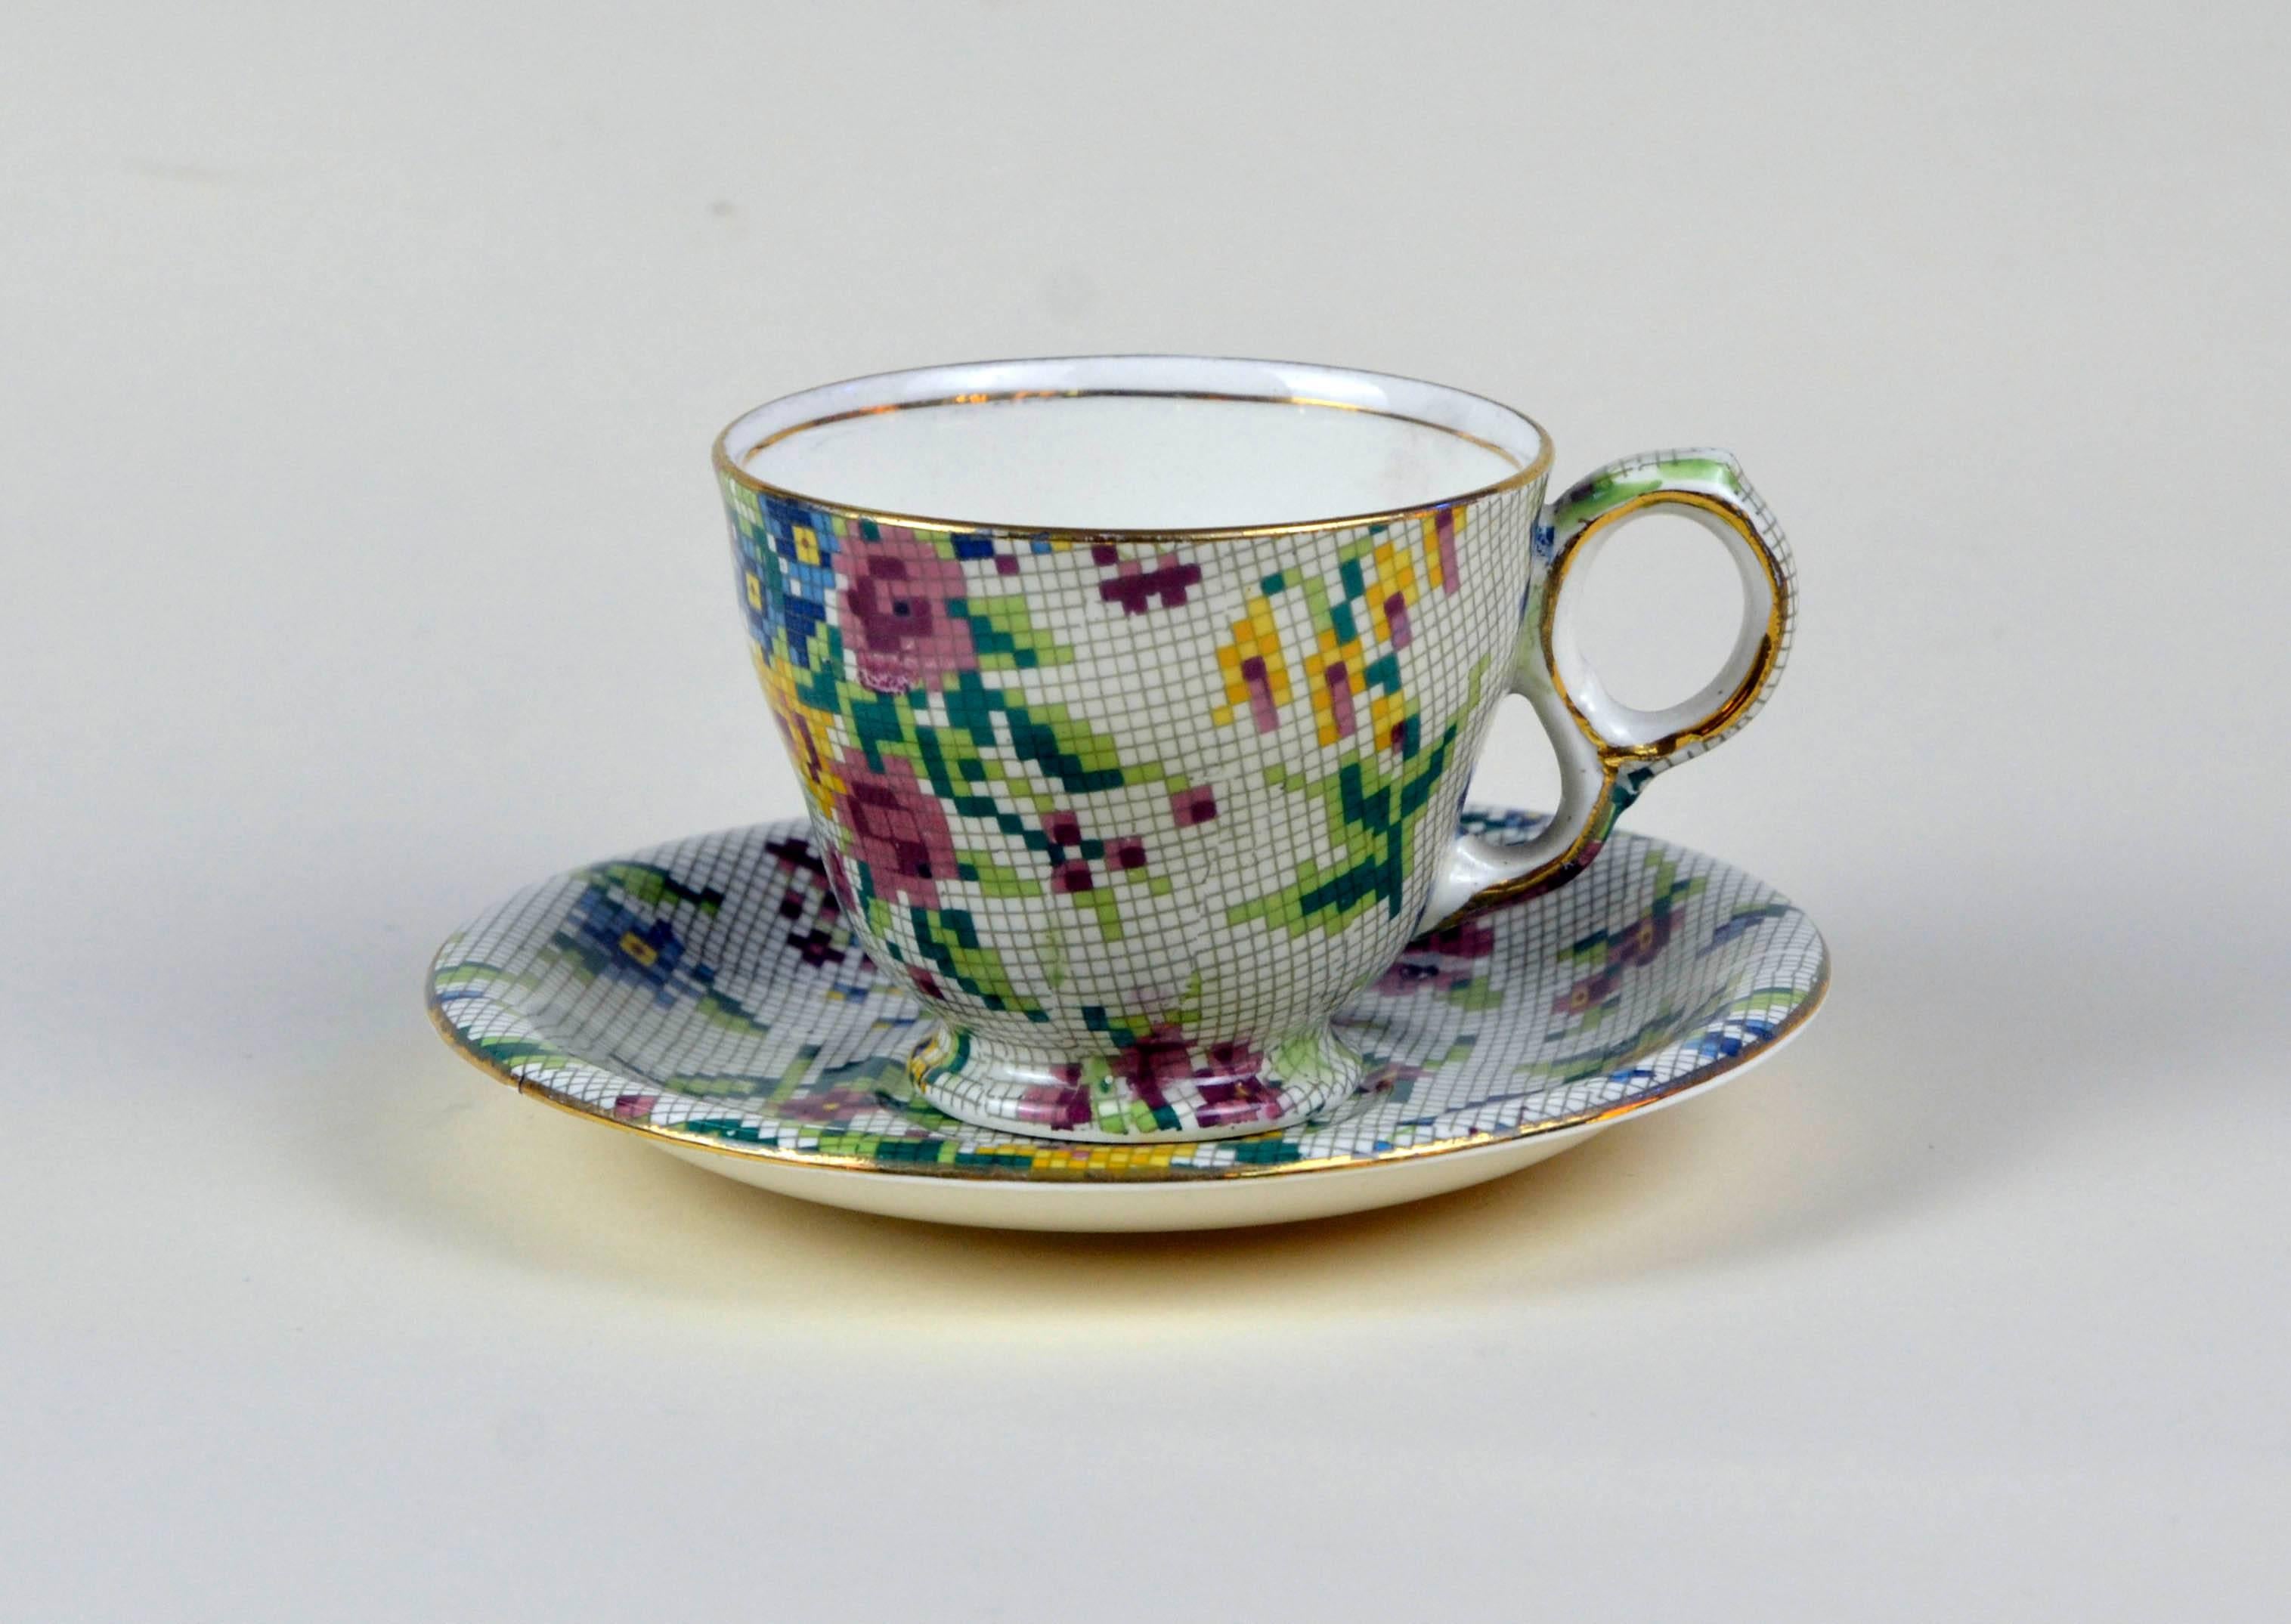 Pair of two Royal Winton earthenware tea cups in pristine condition, not restored and ready to be used. The Queen Anne (1936) needlepoint pattern is part of the famed Chintz collection by Royal Winton. It consist of bouquets of flowers in pink, blue